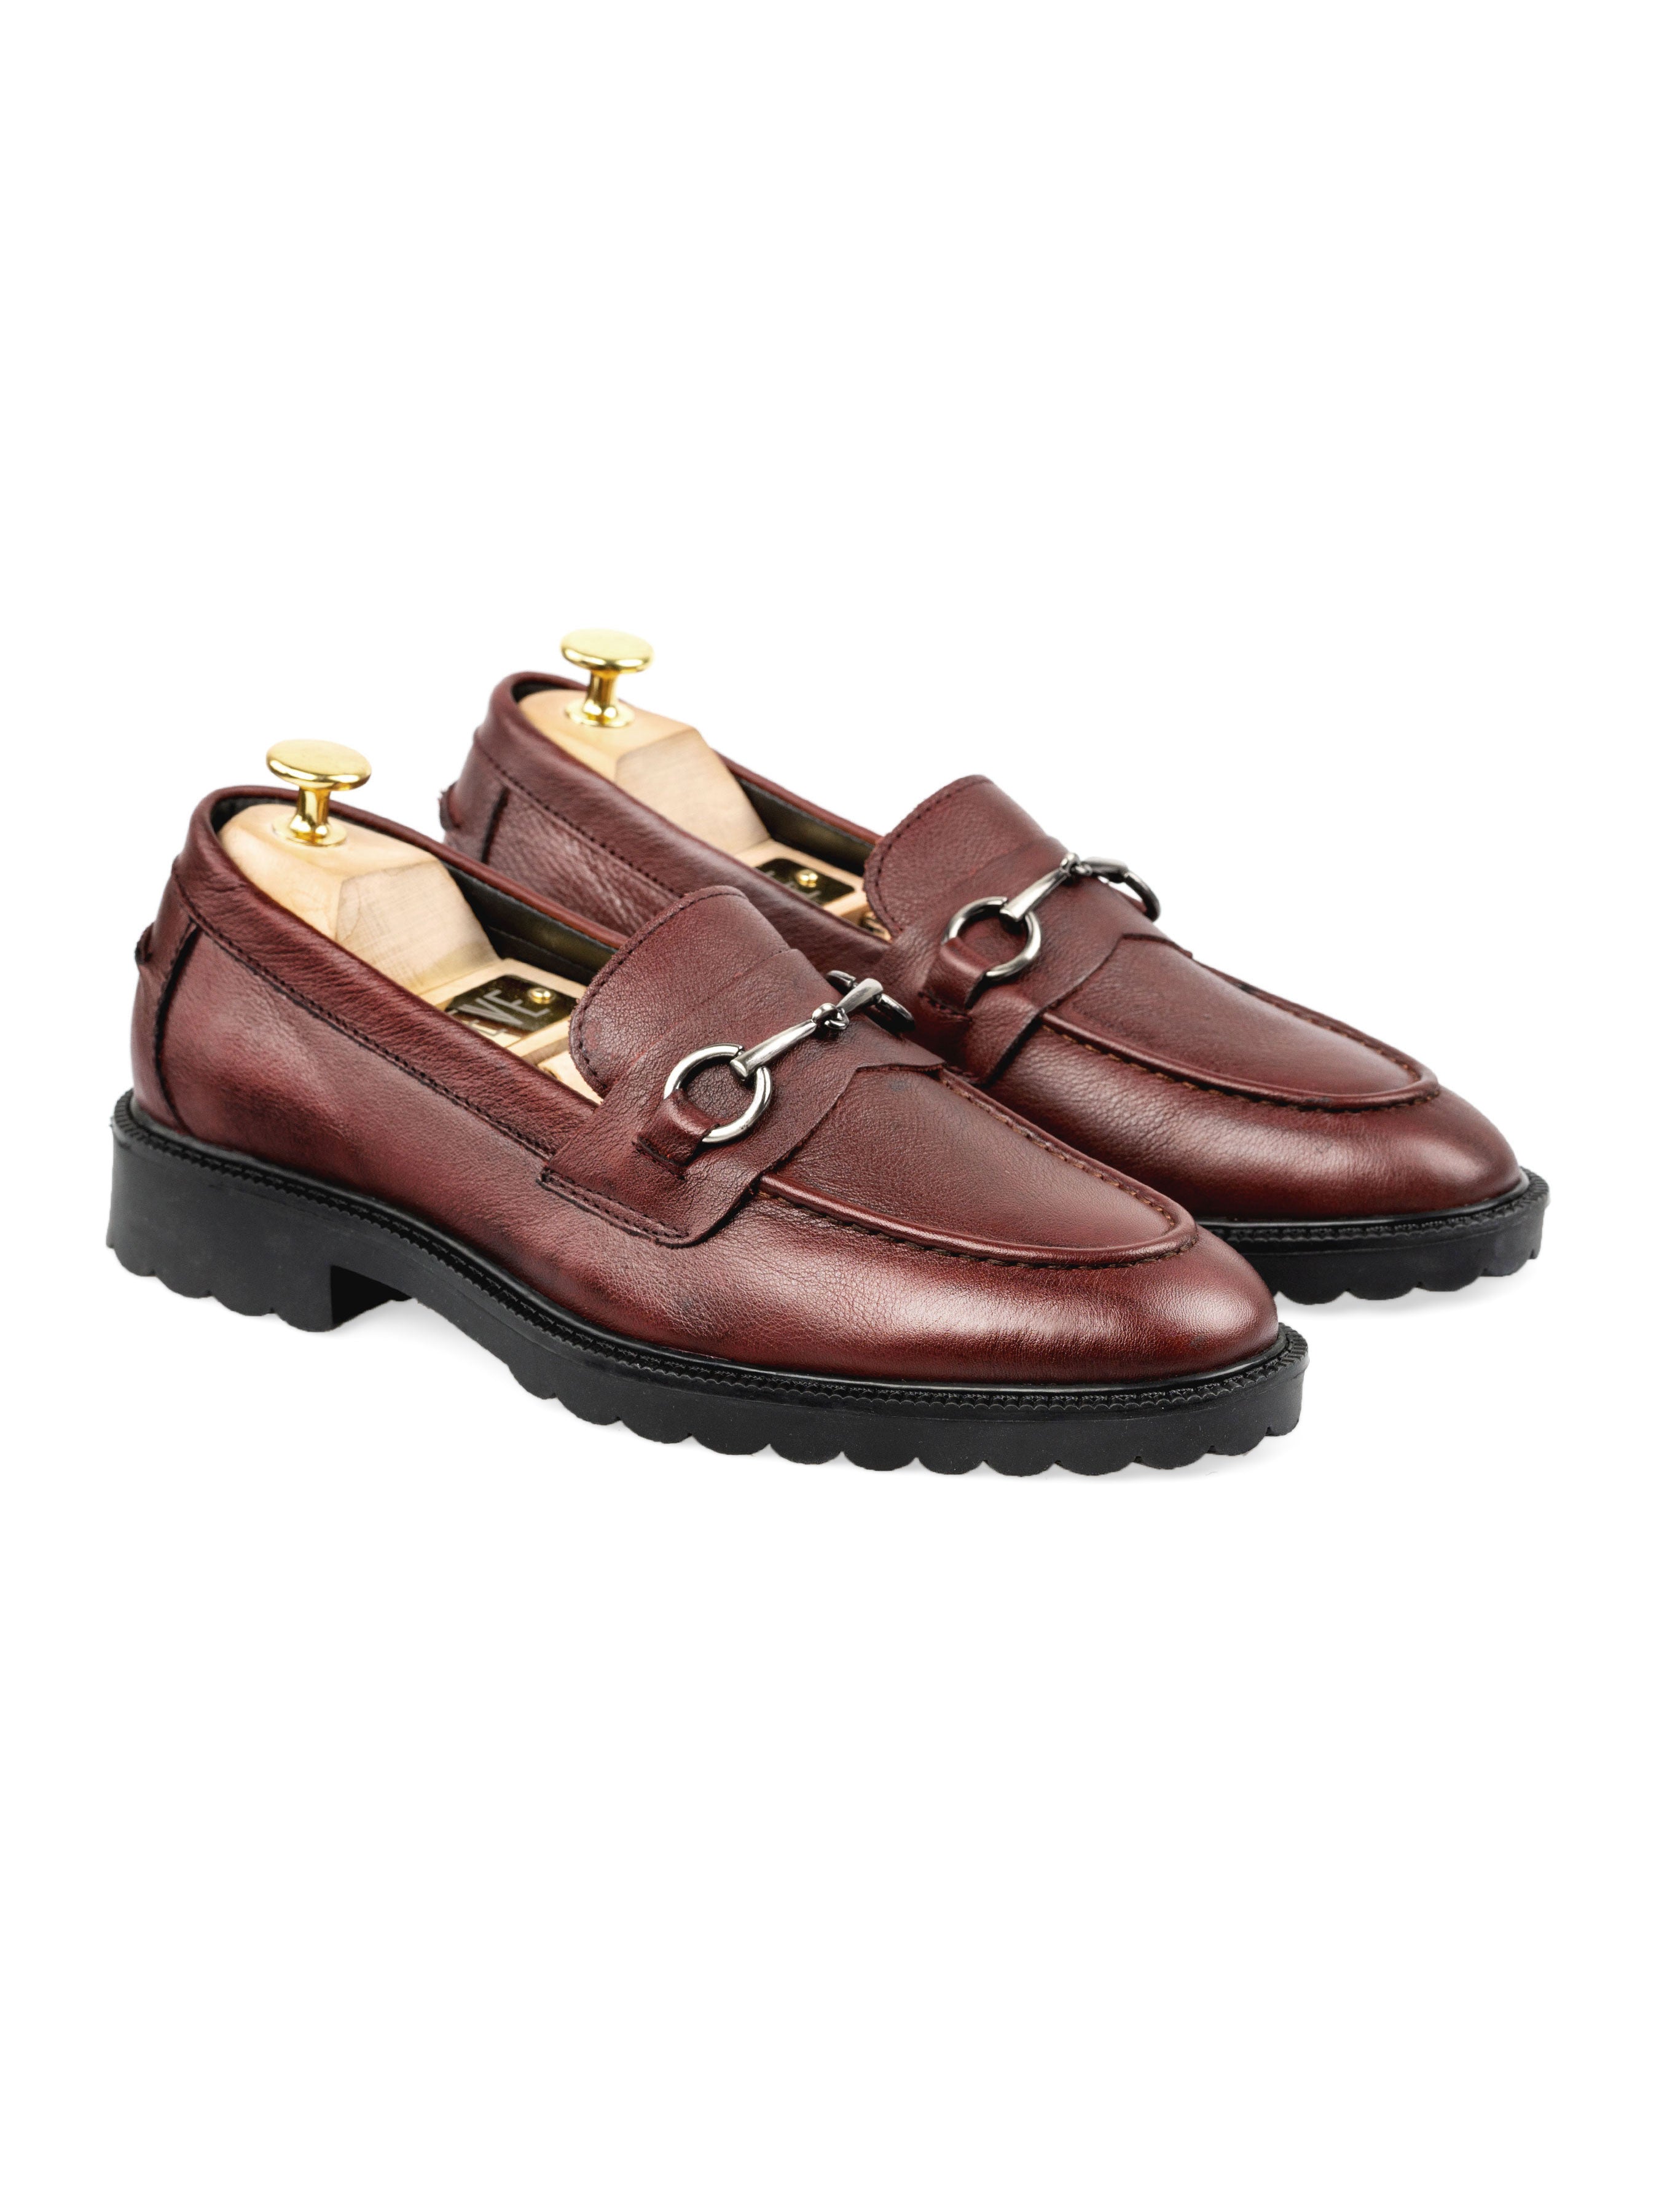 Penny Loafer Horsebit Buckle - Red Burgundy Pebble Grain Leather (Combat Sole) - Zeve Shoes